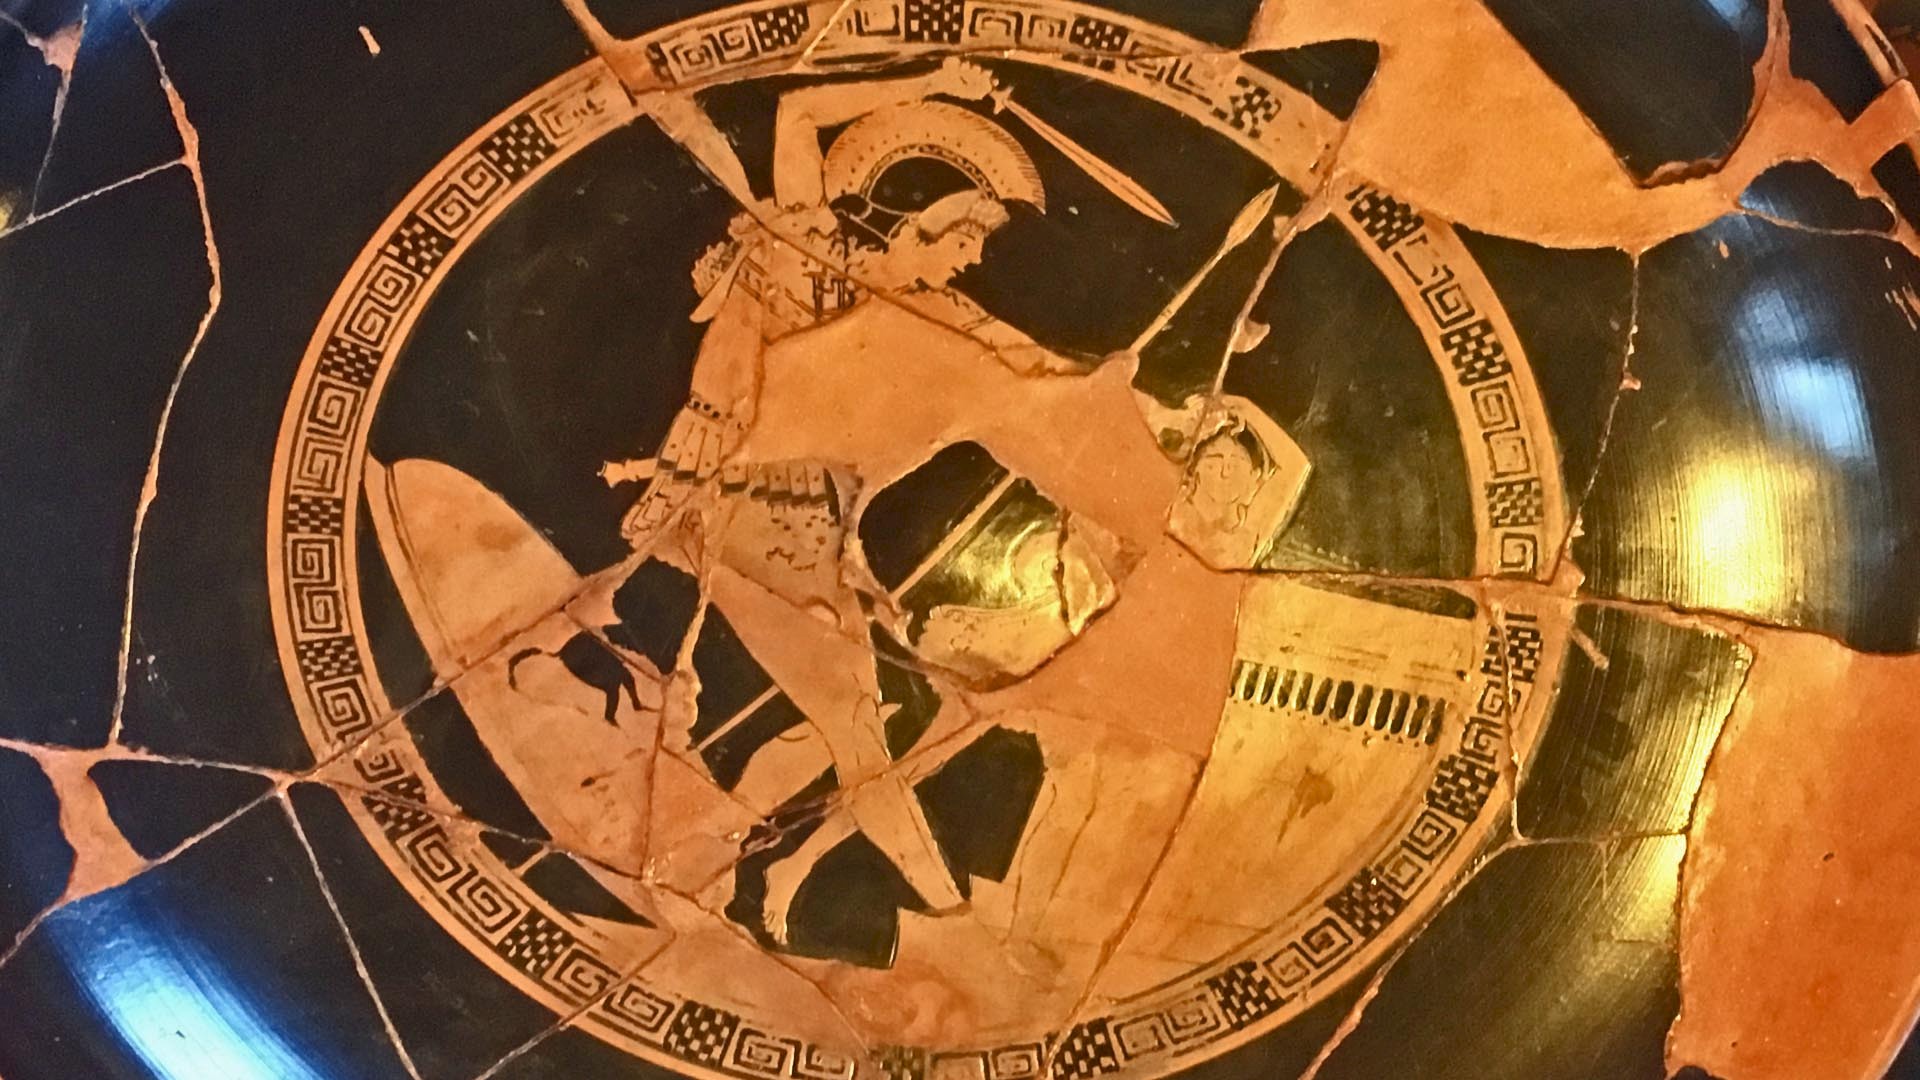 Achilles’ slaying of Troilus